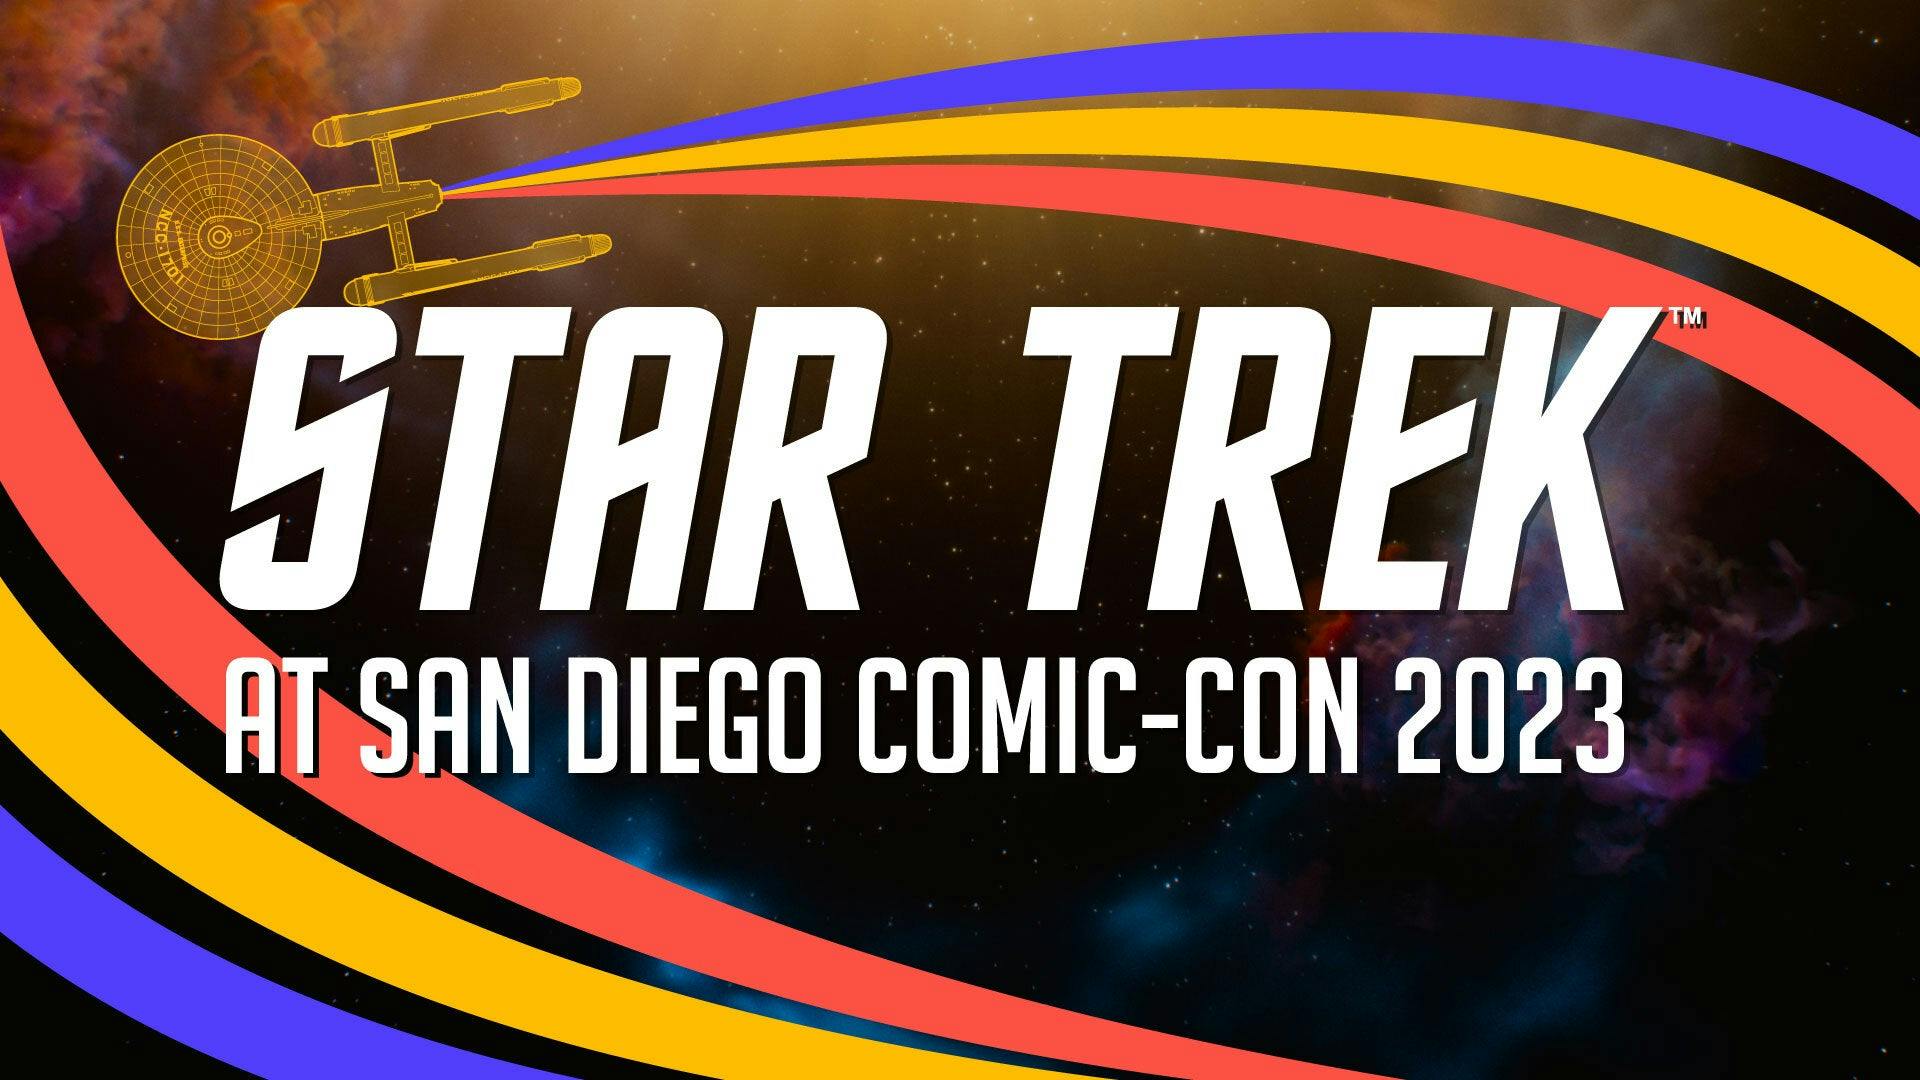 All the 'Star Trek' news we found from San Diego Comic-Con 2023